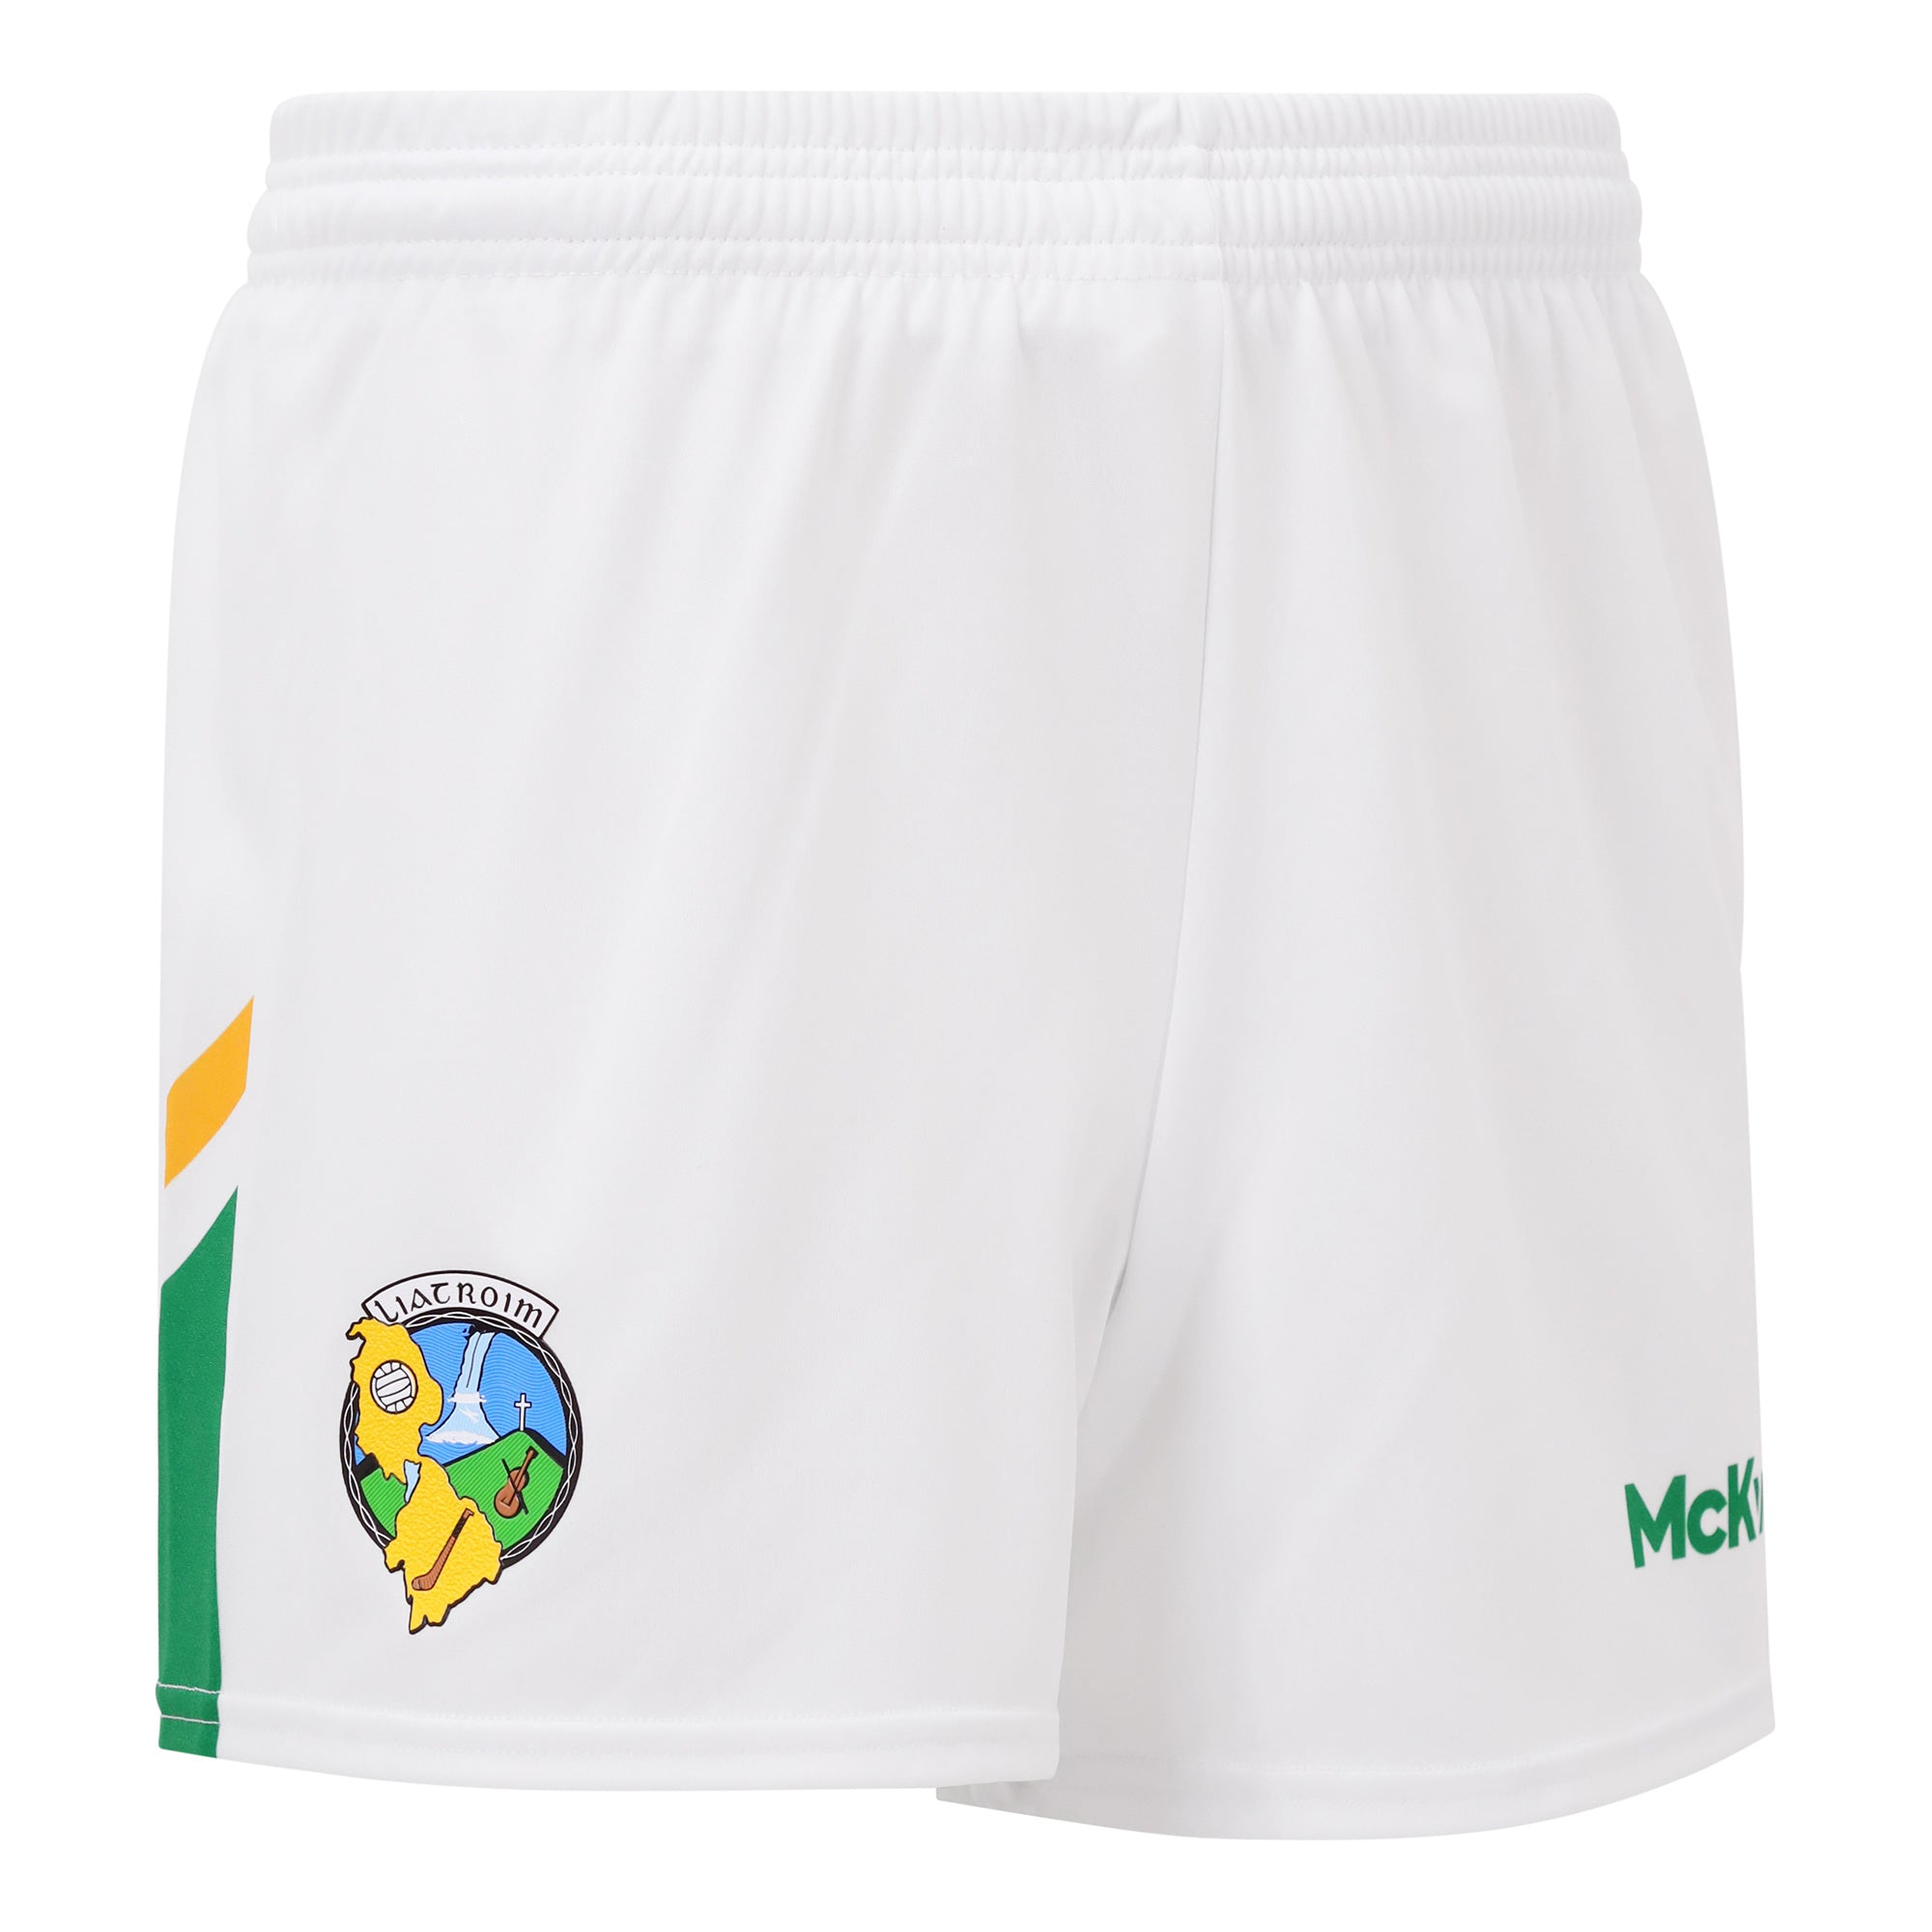 Mc Keever Leitrim GAA Official Playing Shorts - Adult - White/Green